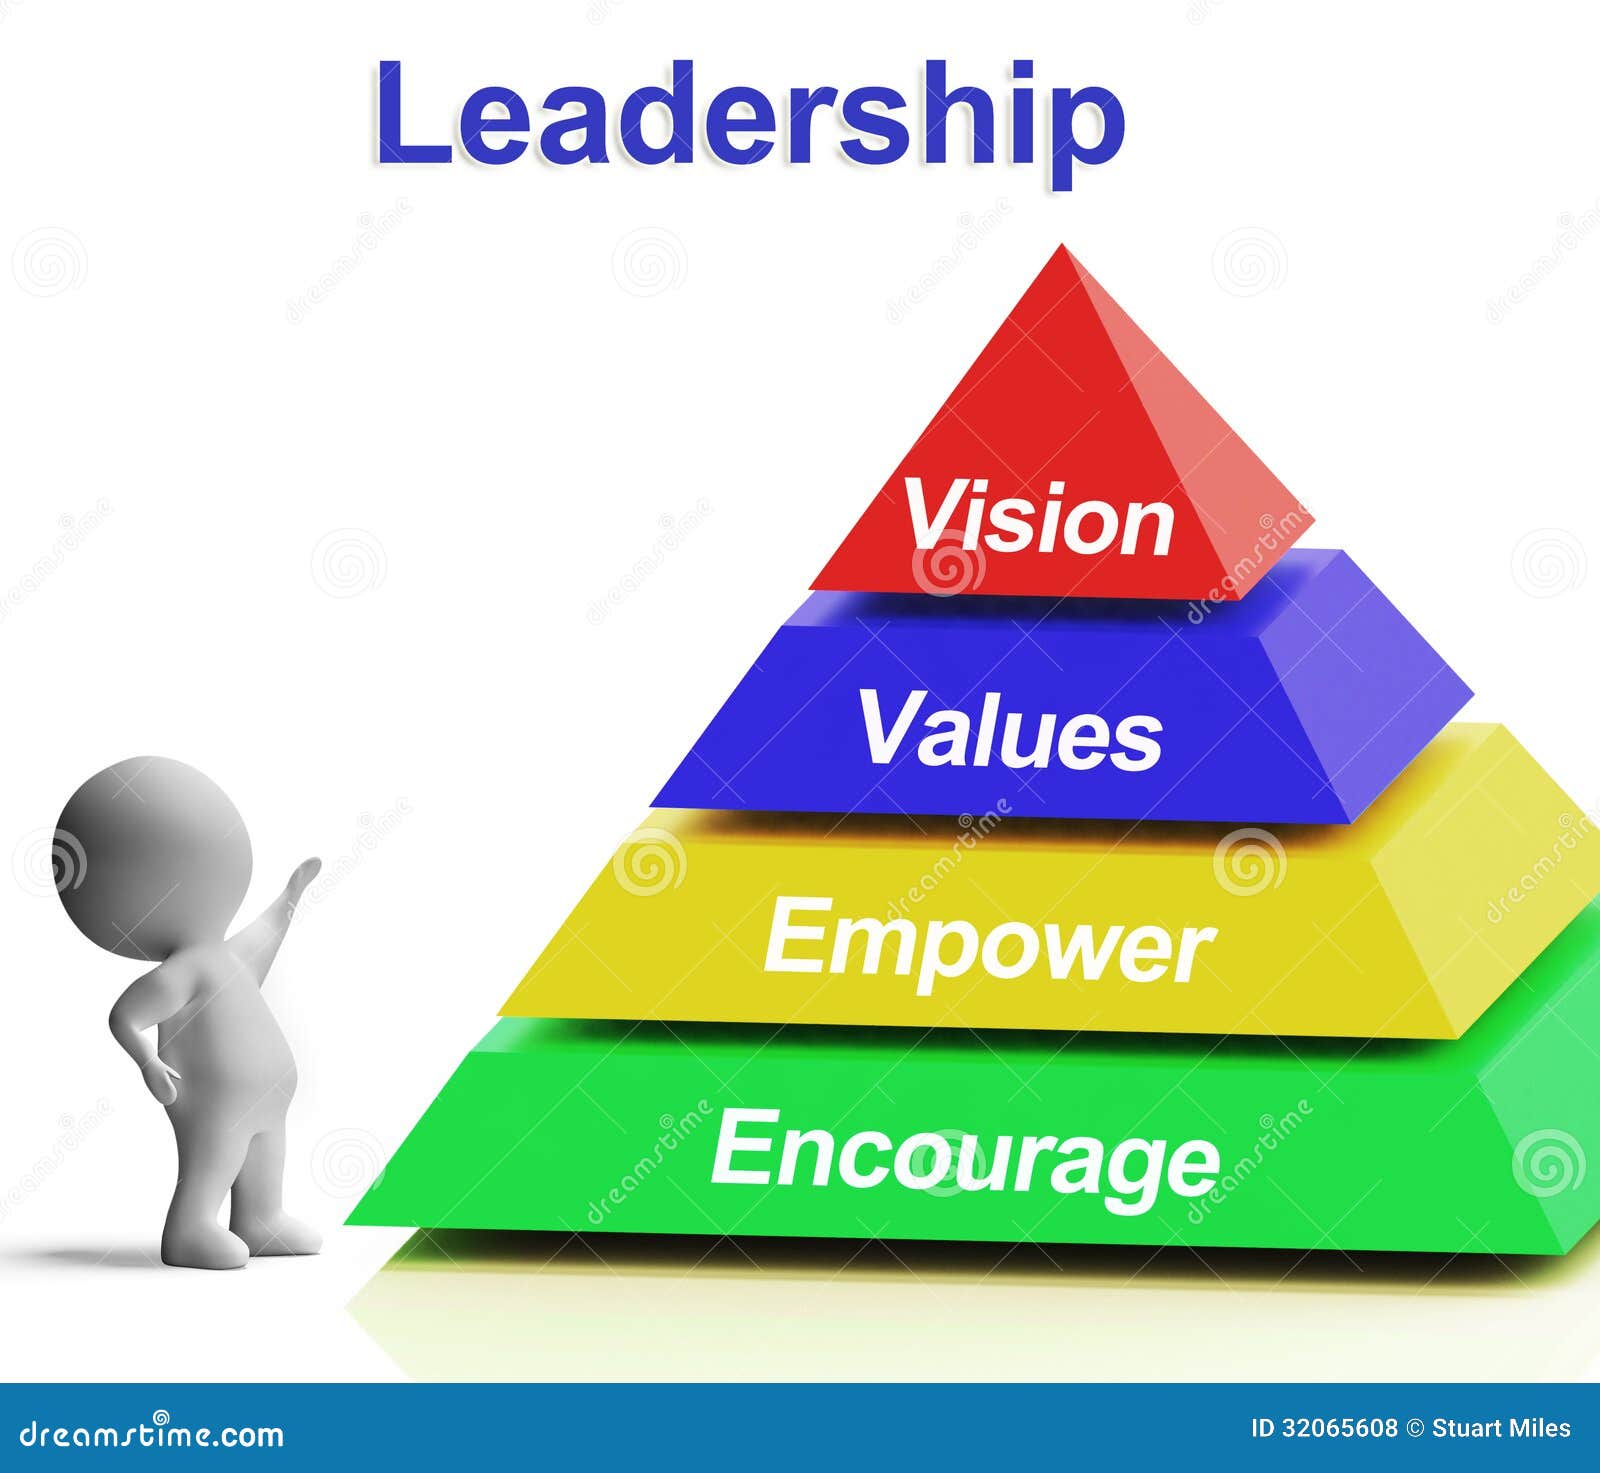 leadership clipart free download - photo #38